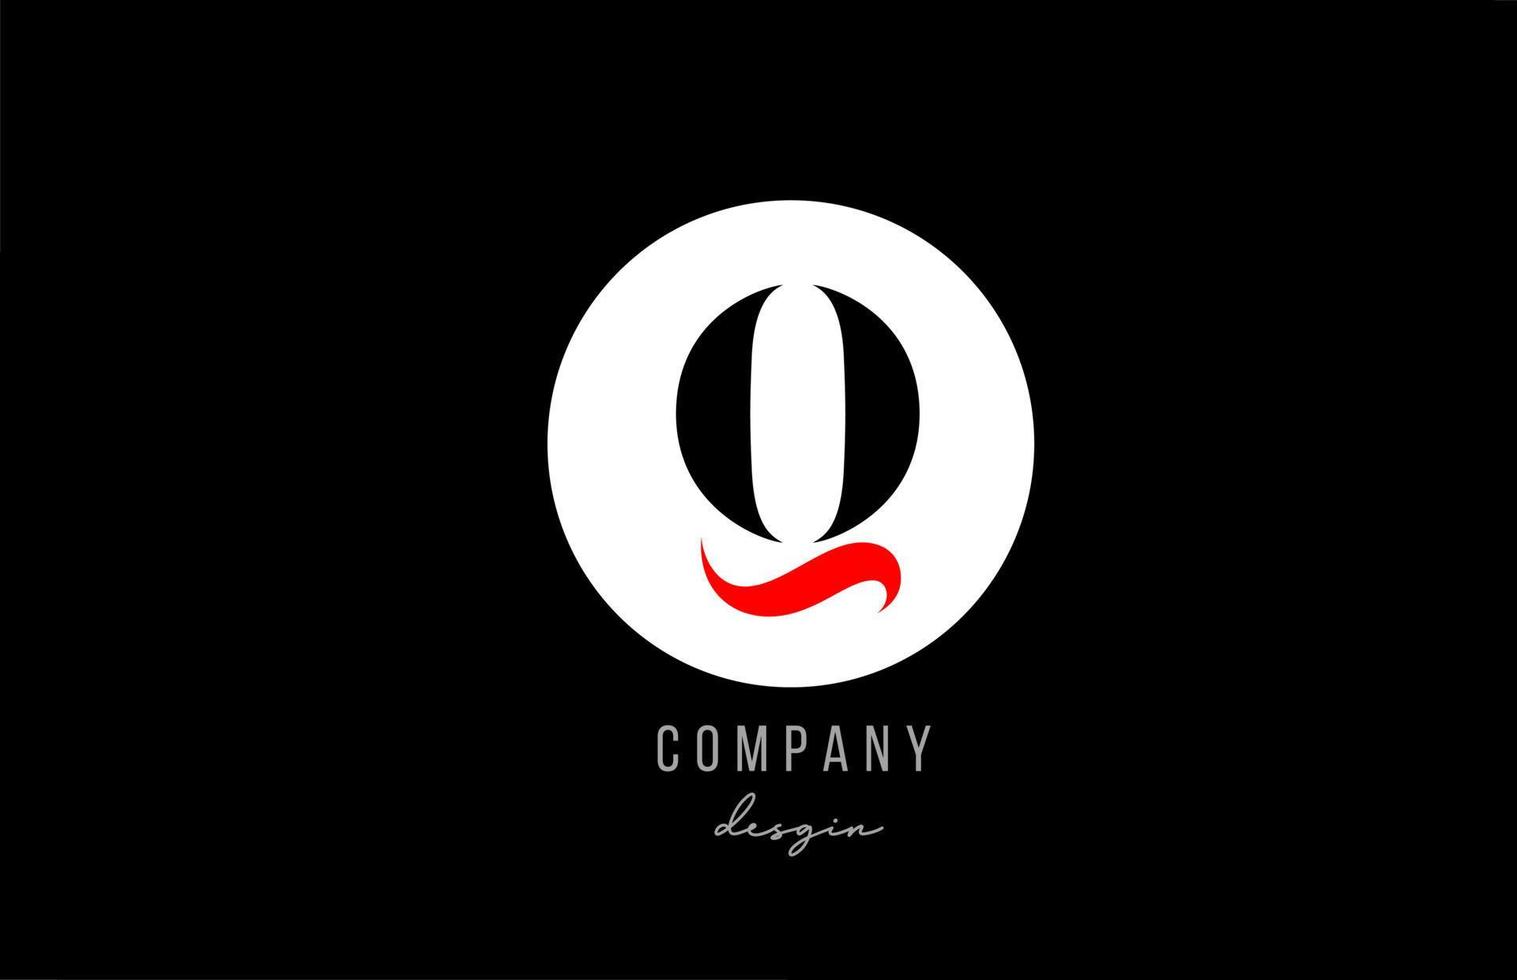 Q letter alphabet logo icon design with white circle for business and company vector